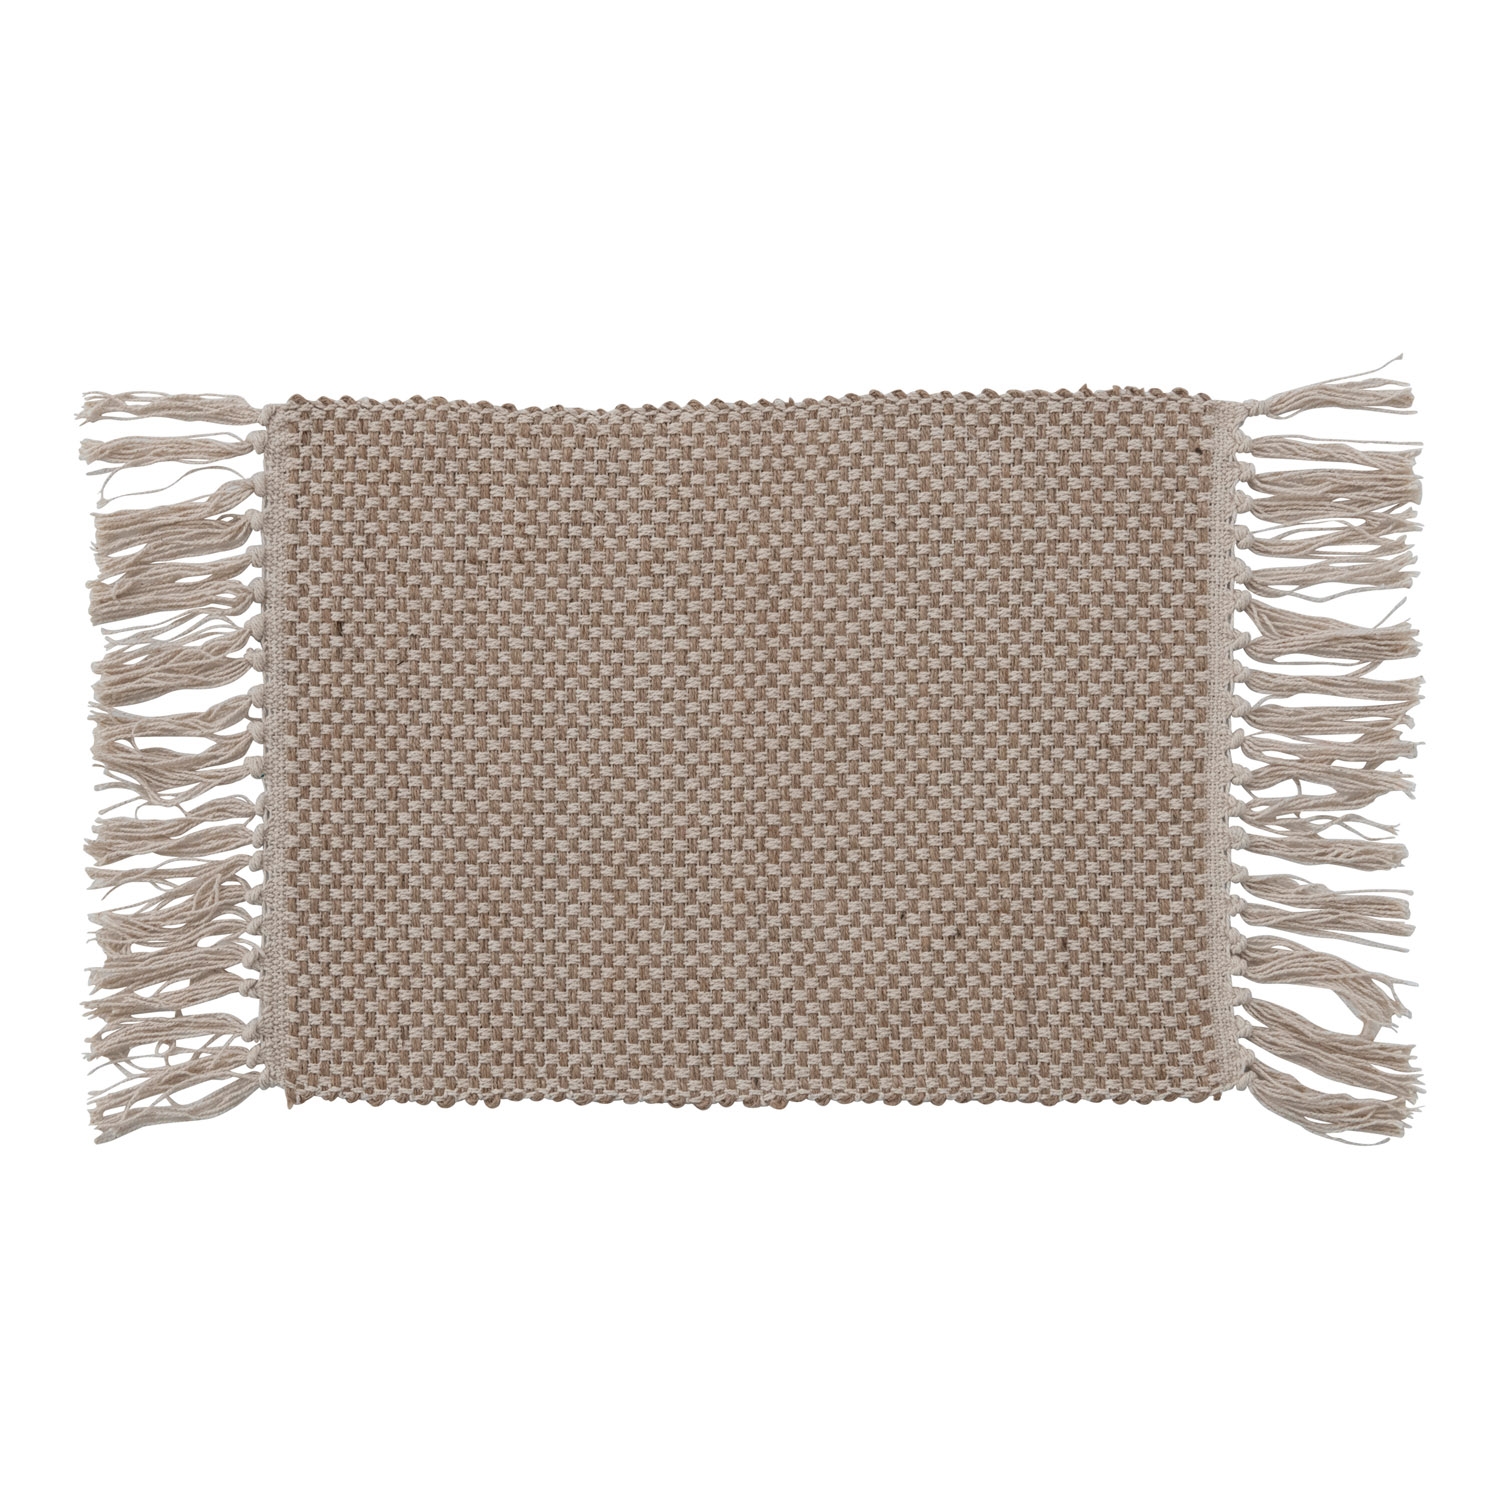 Woven Jute and Cotton Placemat with Fringe - Image 0